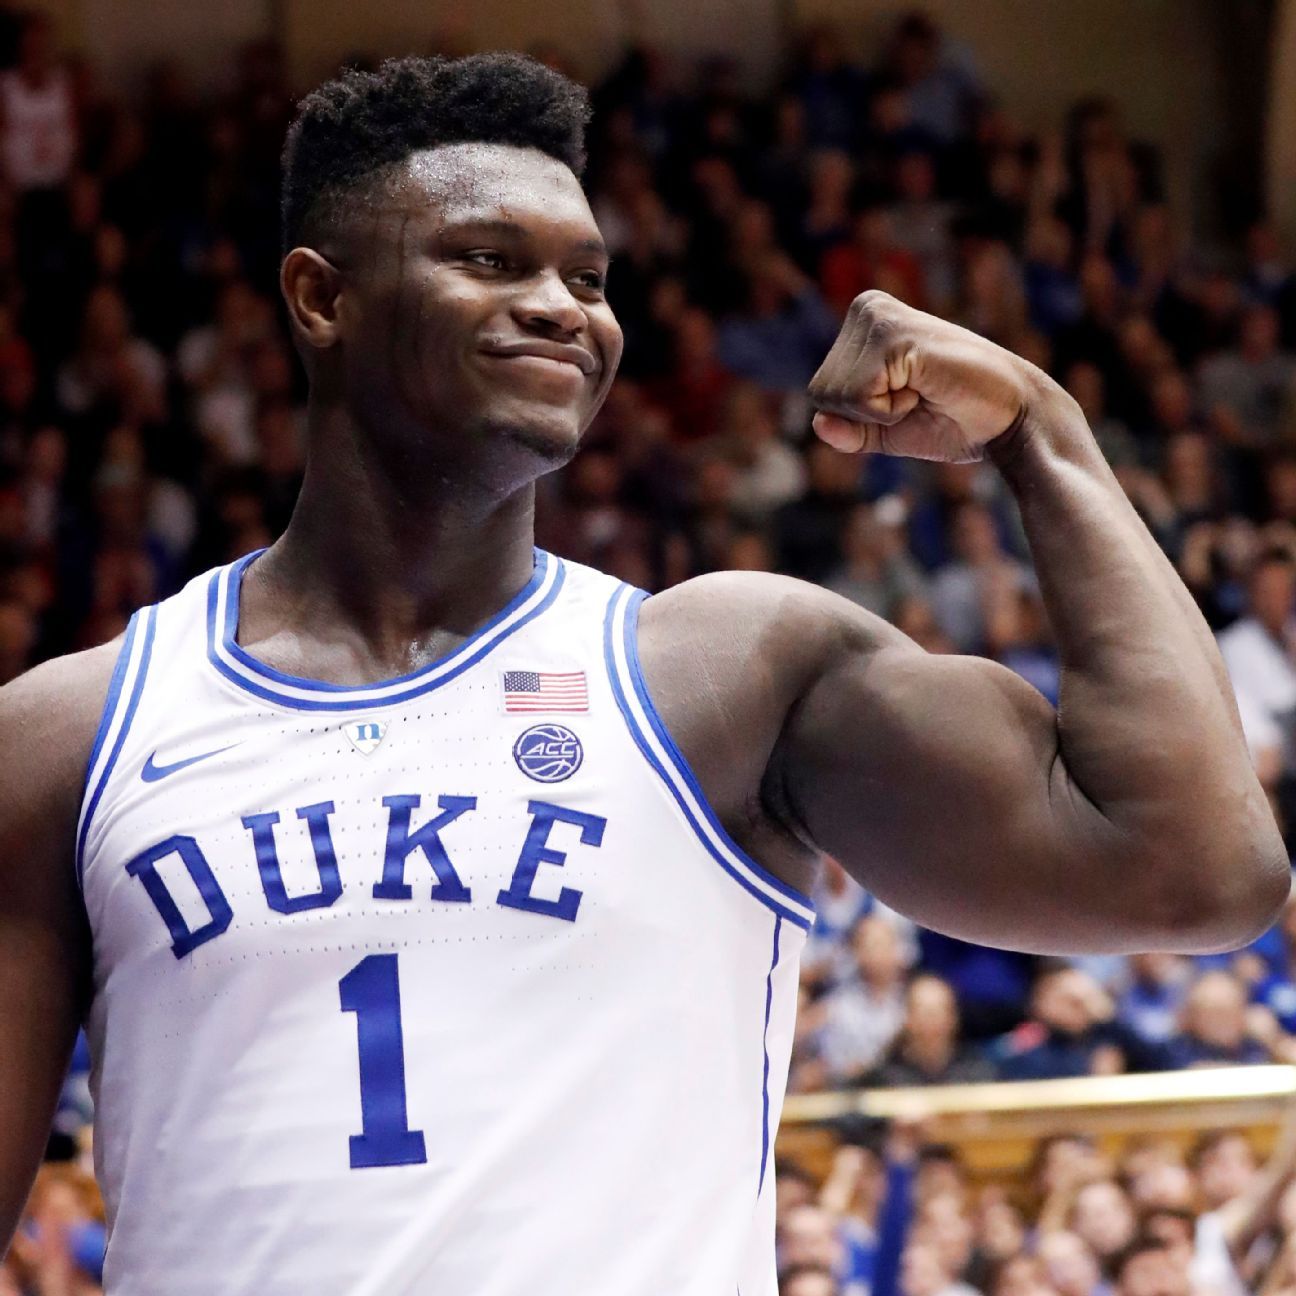 UNC-Duke tickets approaching Super Bowl prices because of Zion Williamson